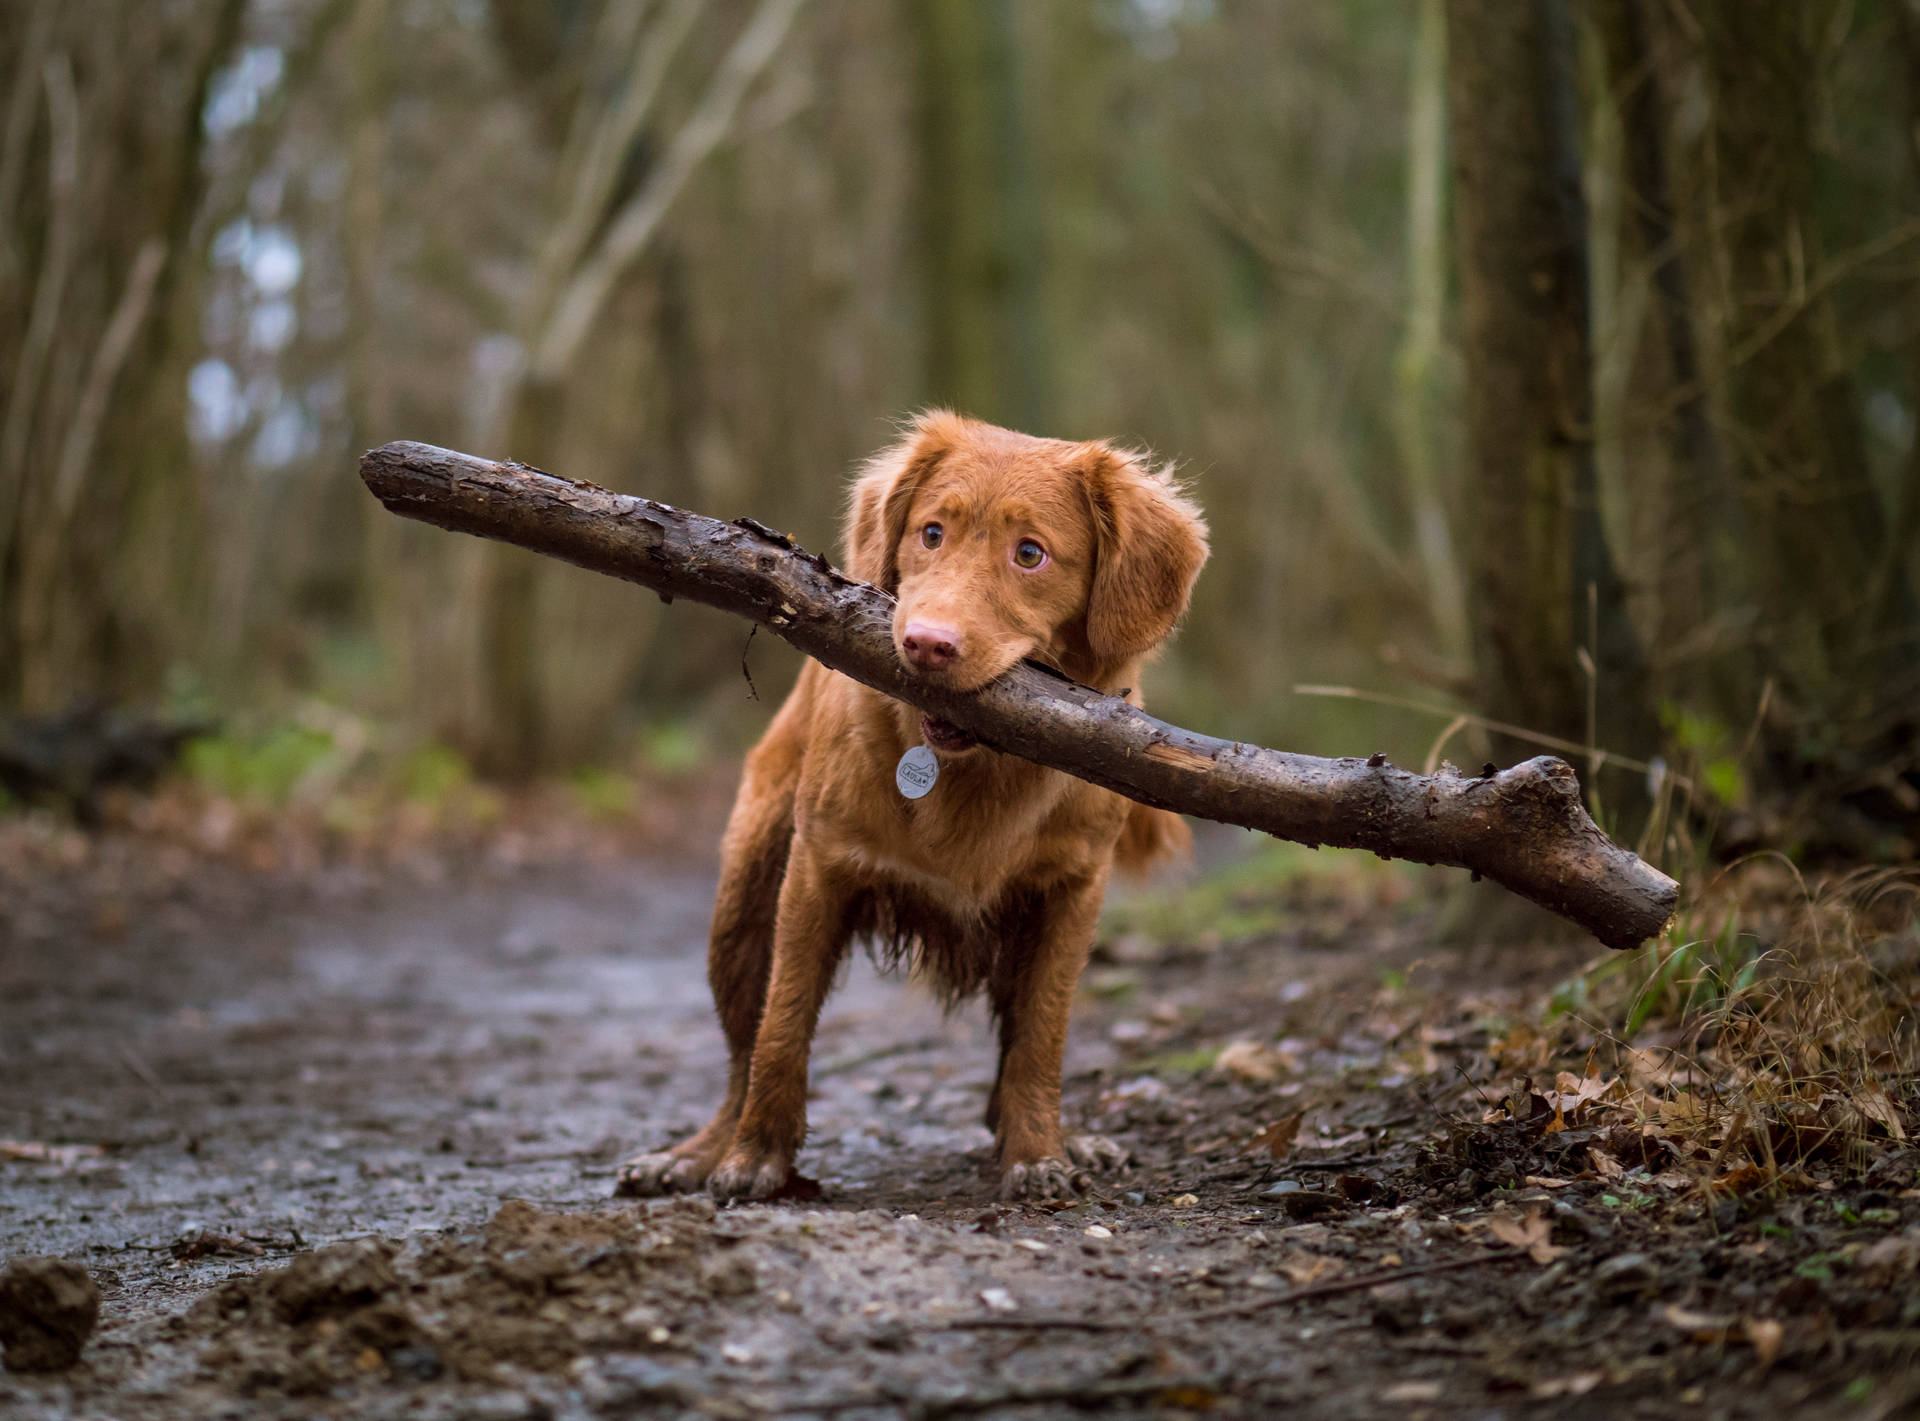 Dog biting wood while walking in forest wallpaper.